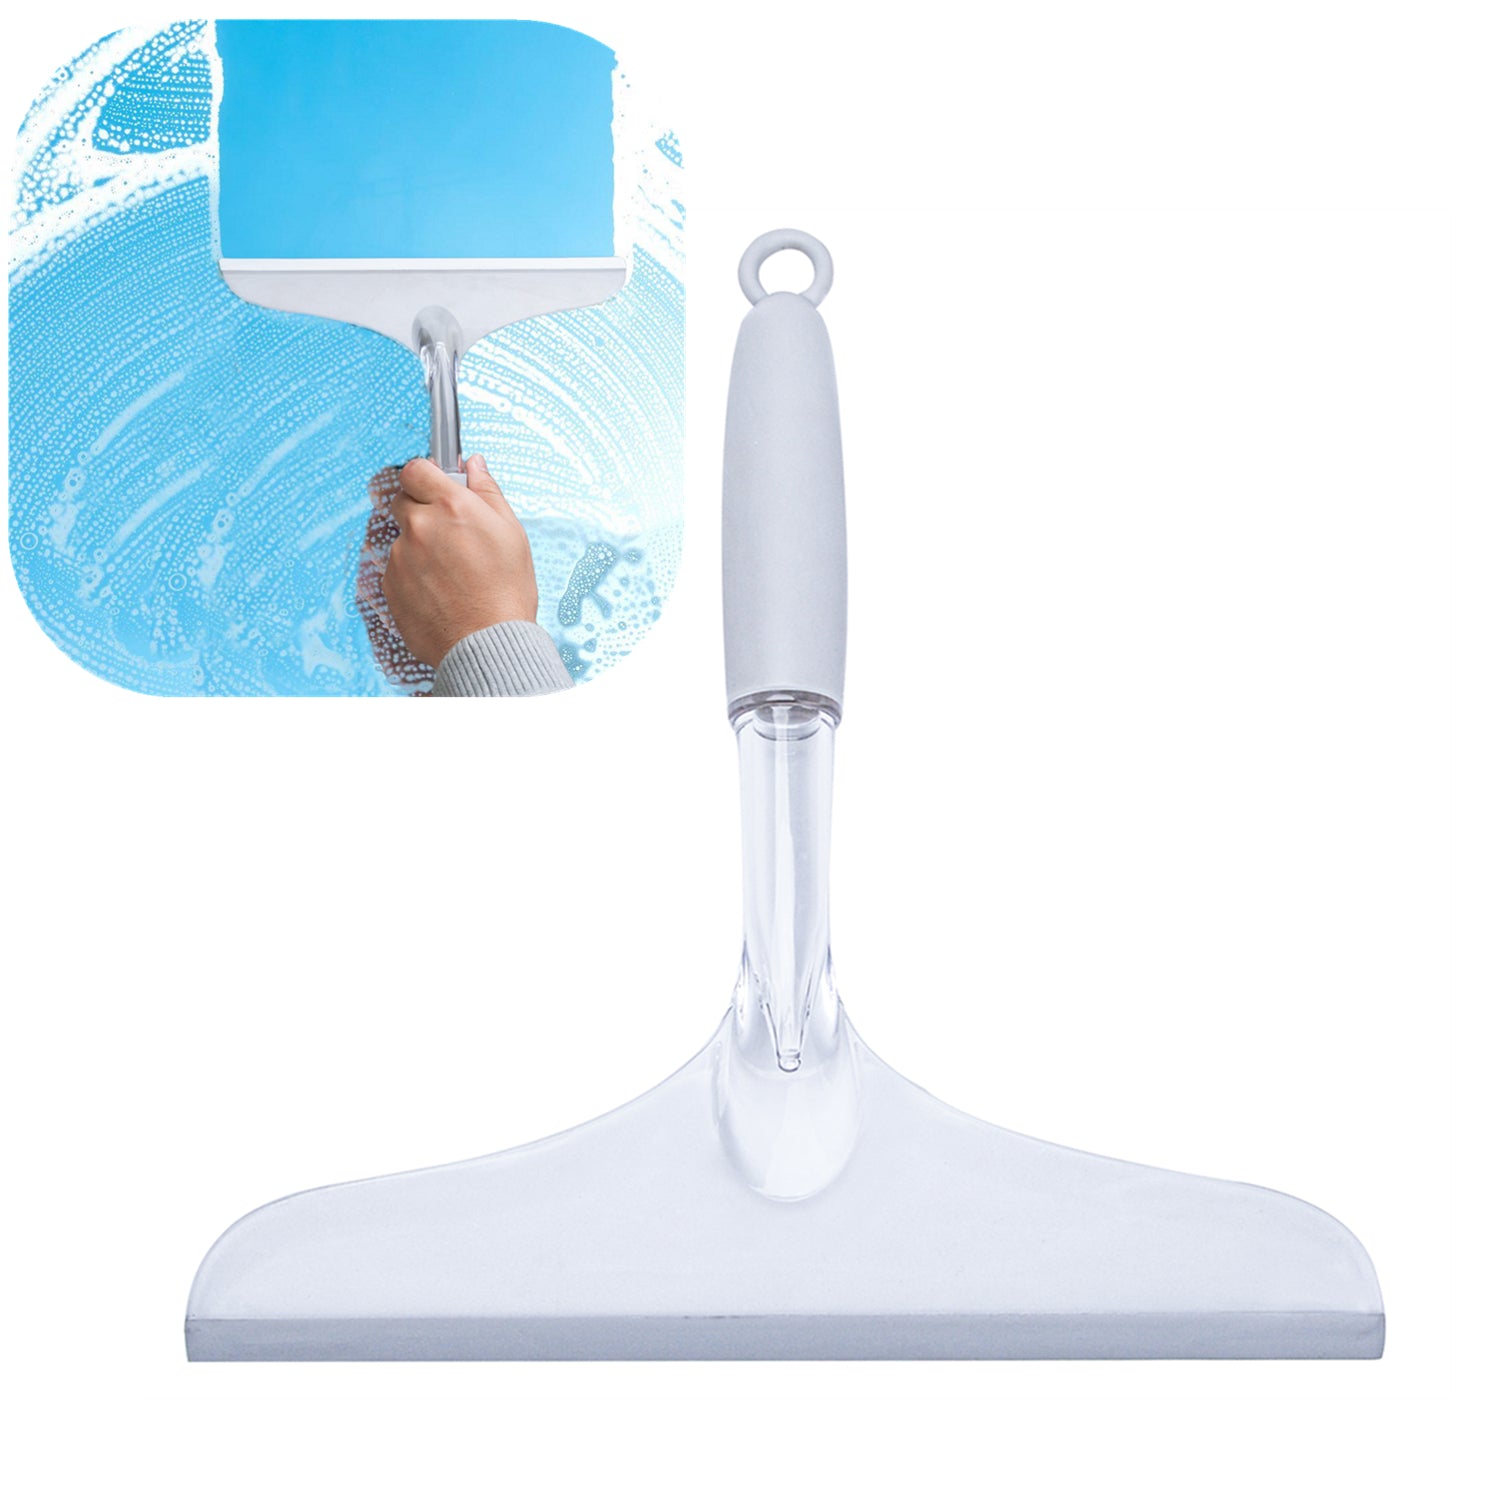 Bathroom Shower Squeegee - Shower Glass Cleaning Tool & Shower